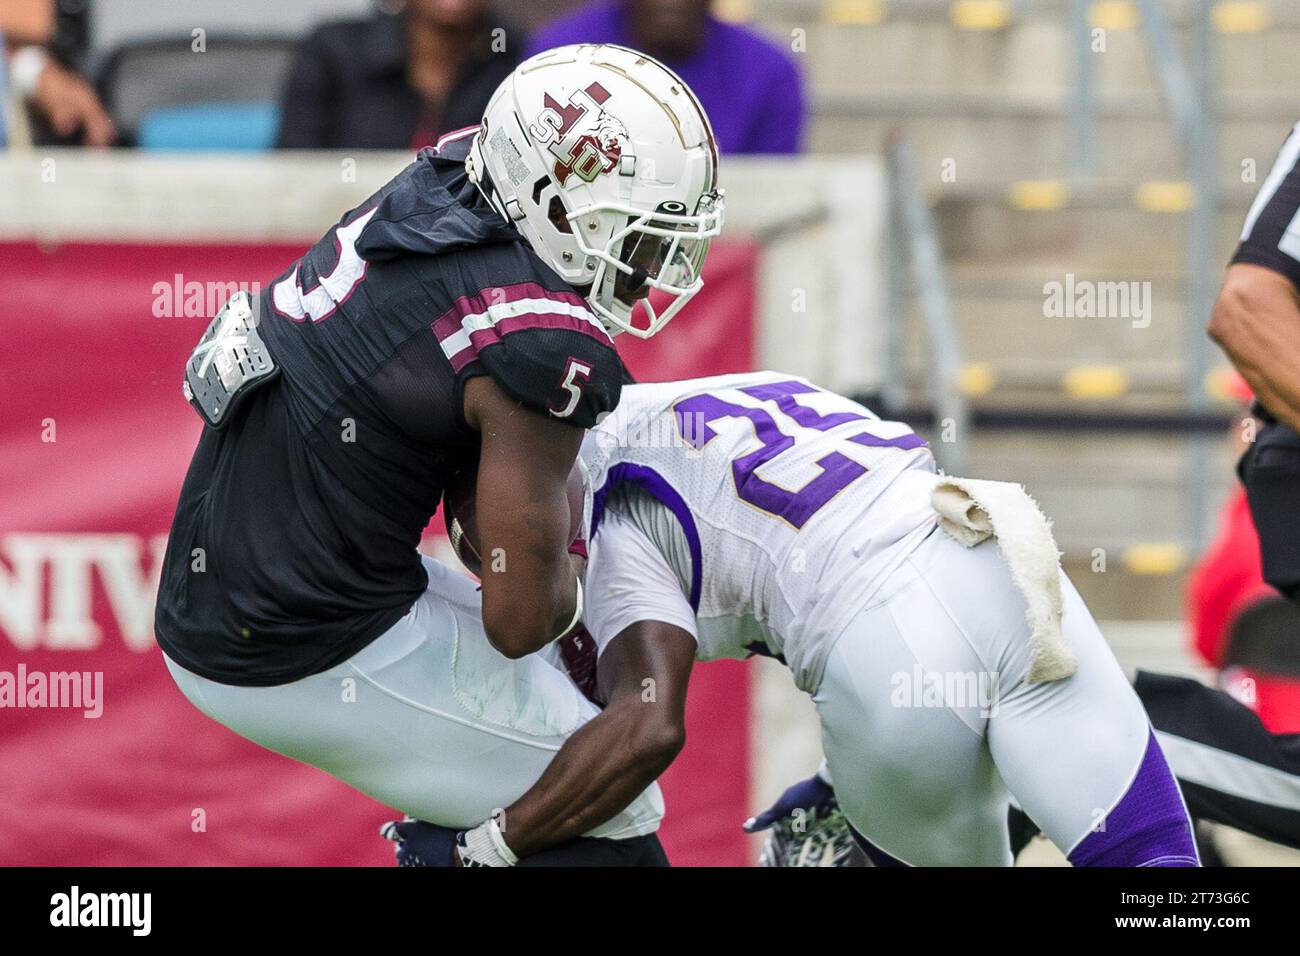 Houston, Texas, USA. 12th Nov, 2023. Texas Southern Tigers wide receiver Quay Davis (5) is tackled by Alcorn State Braves defensive back Robert McDaniel (29) during the NCAA football game between the Alcorn State Braves and the Texas Southern Tigers at Shell Energy Stadium in Houston, Texas. Texas Southern defeated Alcorn State 44-10. Prentice C. James via Cal Sport Media/Alamy Live News Stock Photo